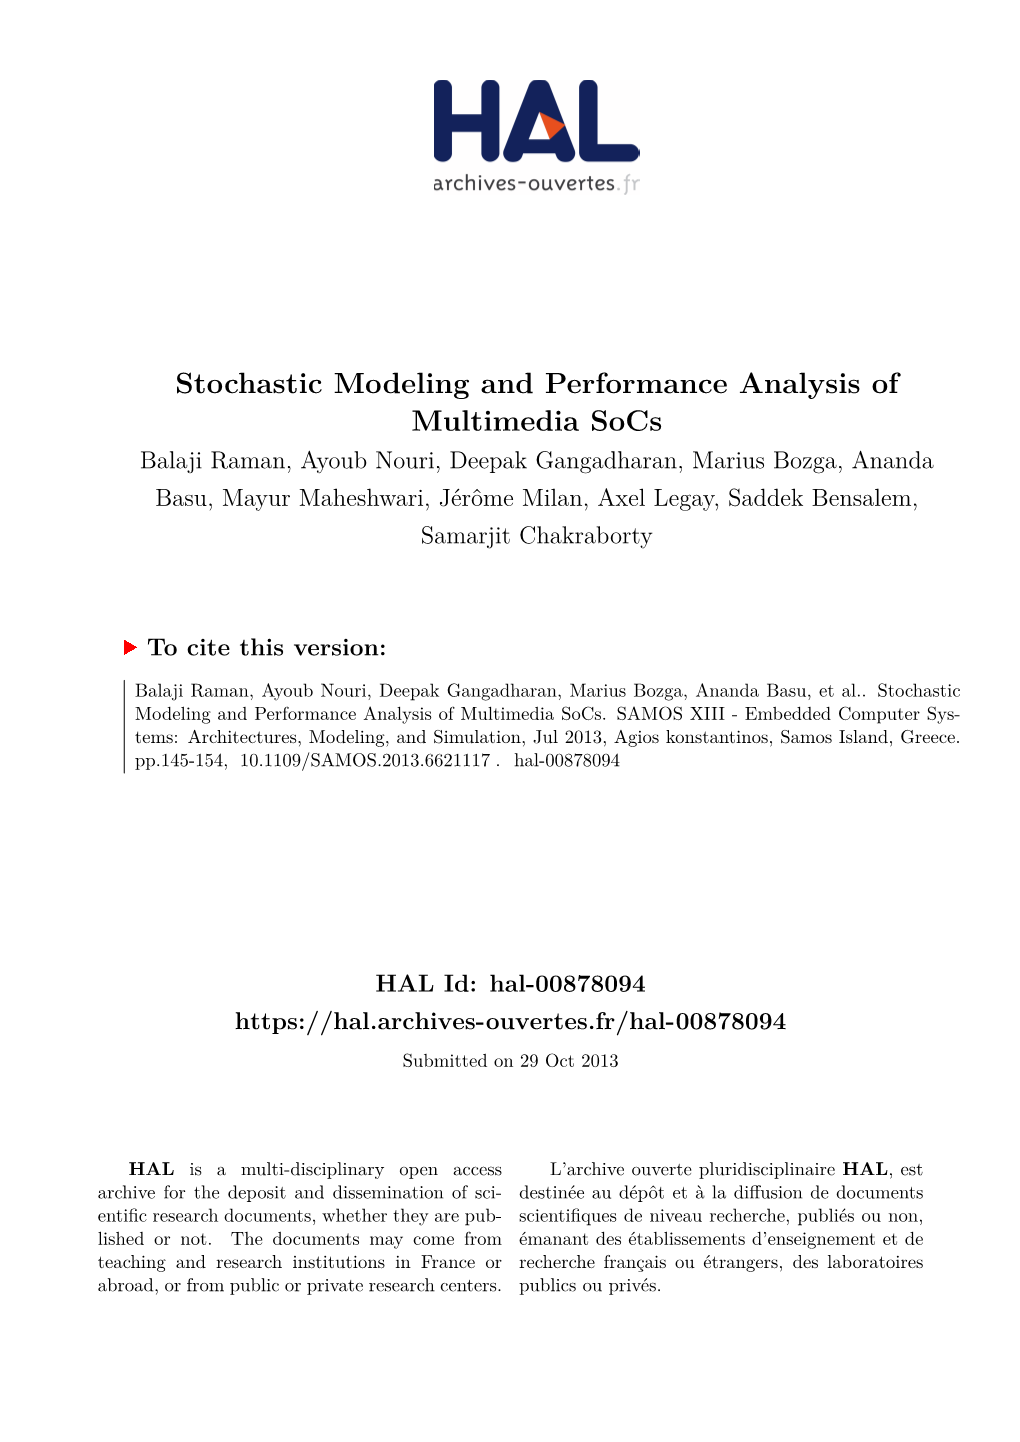 Stochastic Modeling and Performance Analysis of Multimedia Socs